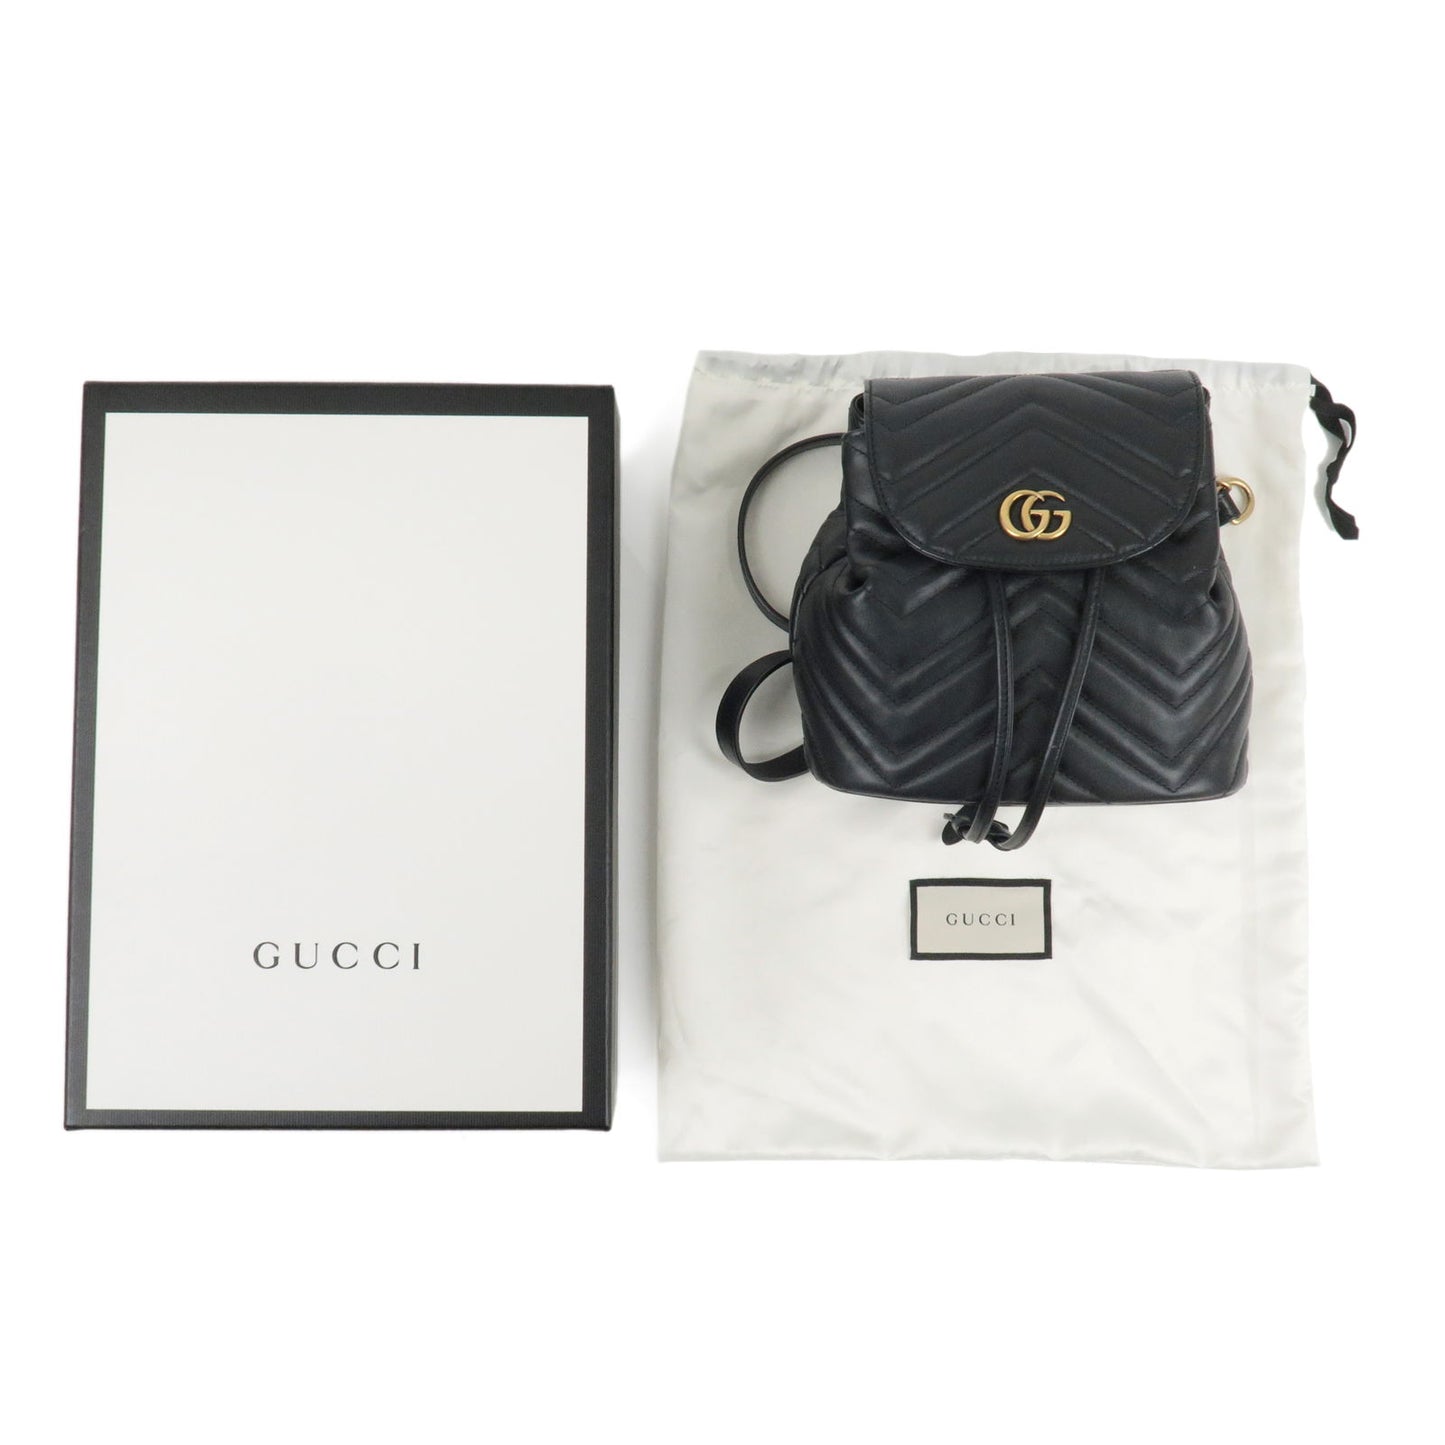 GUCCI GG Marmont Leather Back Pack Ruck Sack Black 528129